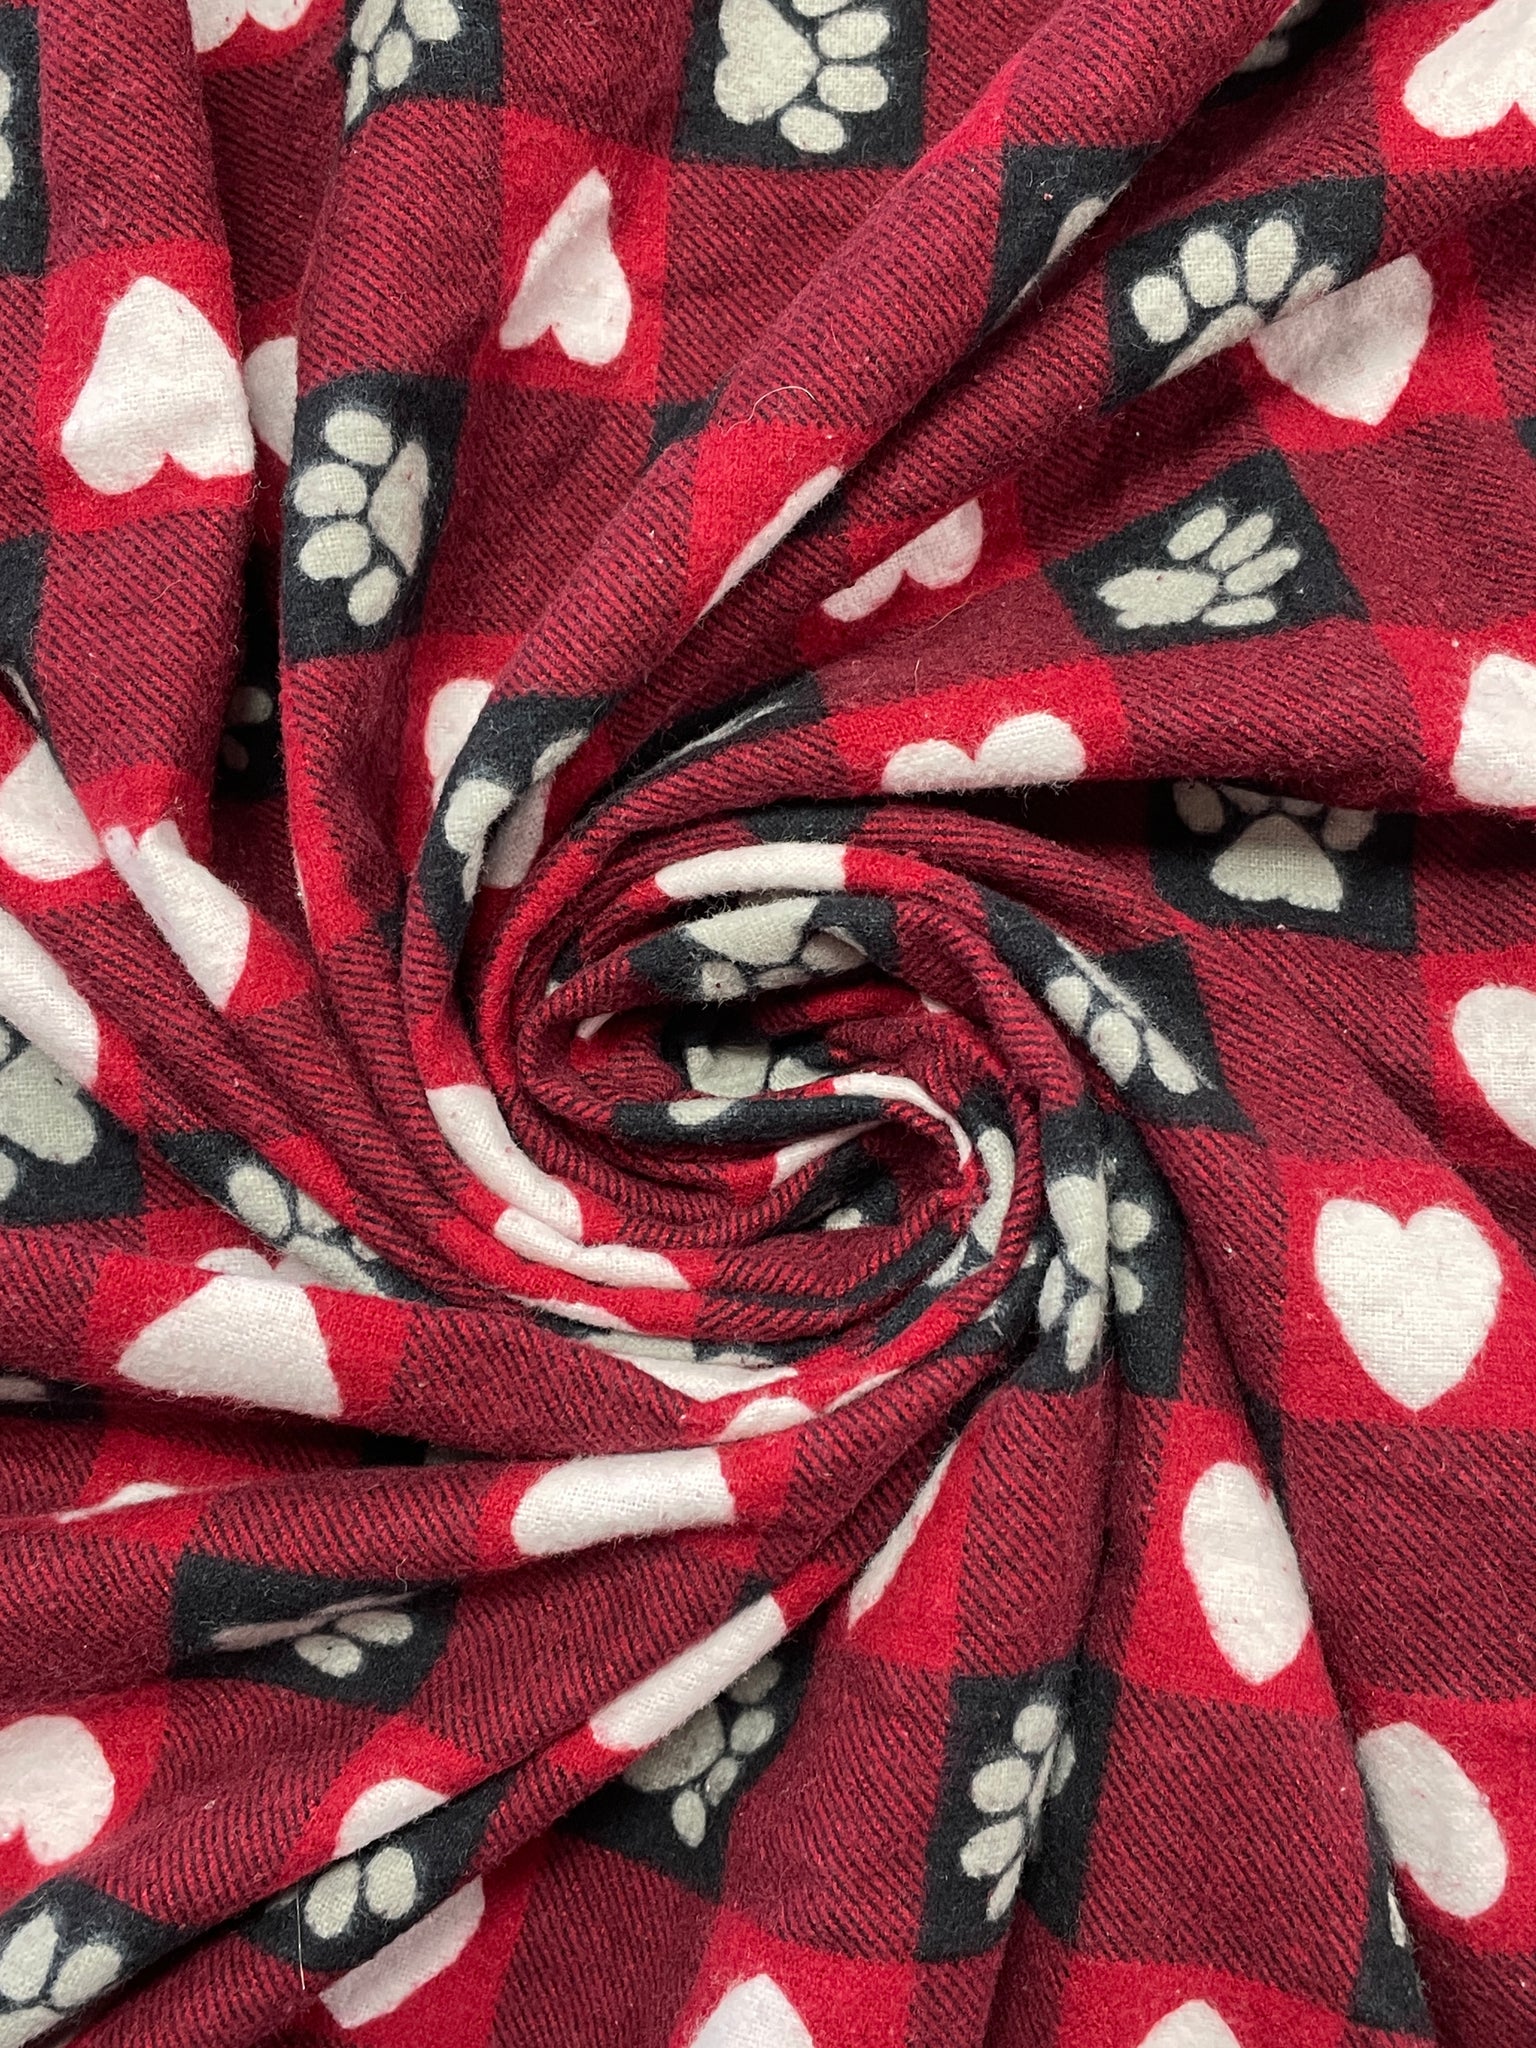 3 3/4 YD Cotton Flannel Printed Buffalo Plaid - Red and Black with Hearts and Paw Prints